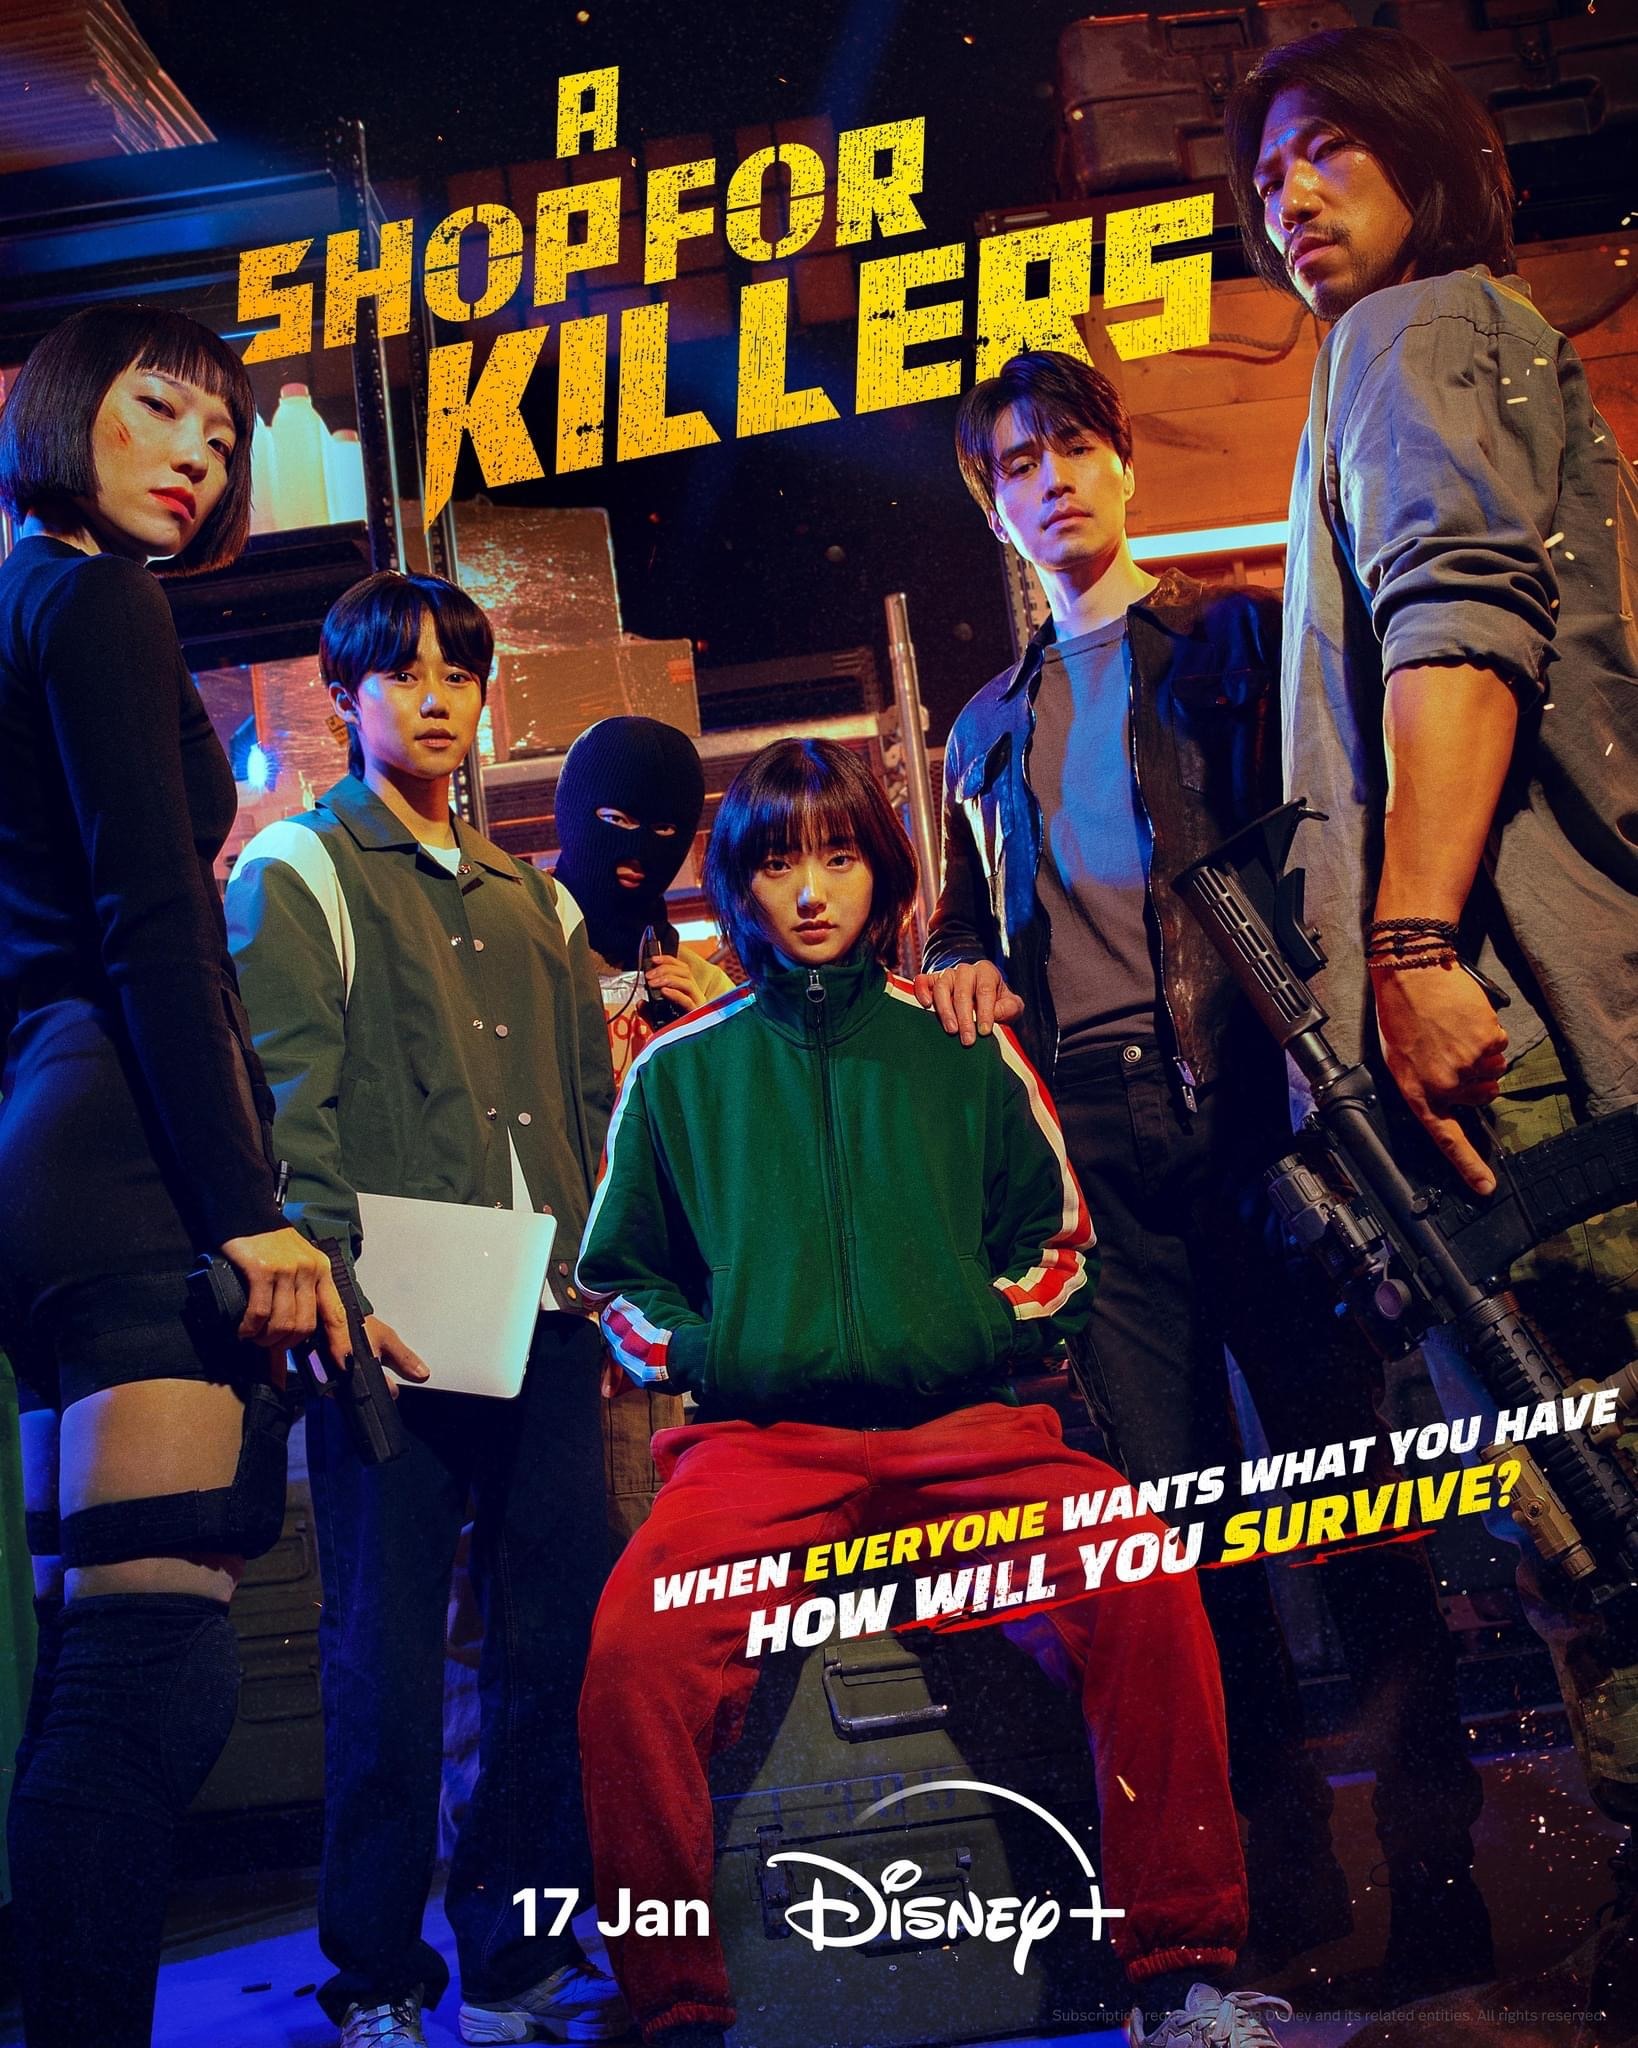 Mega Sized TV Poster Image for A Shop for Killers (#2 of 4)